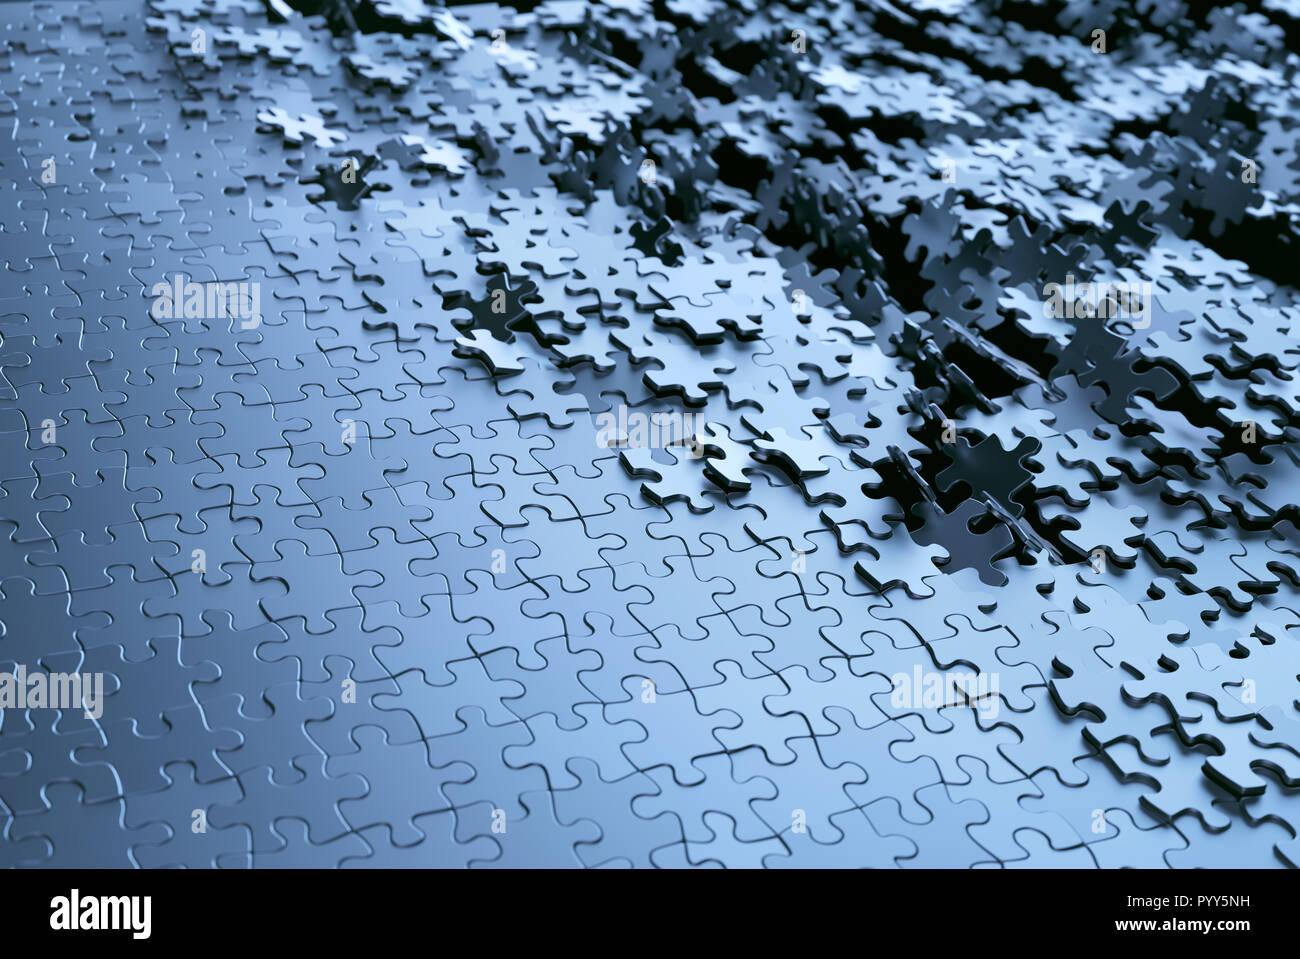 3D illustration abstract background. Image of puzzle pieces in chrome gray metal. Stock Photo